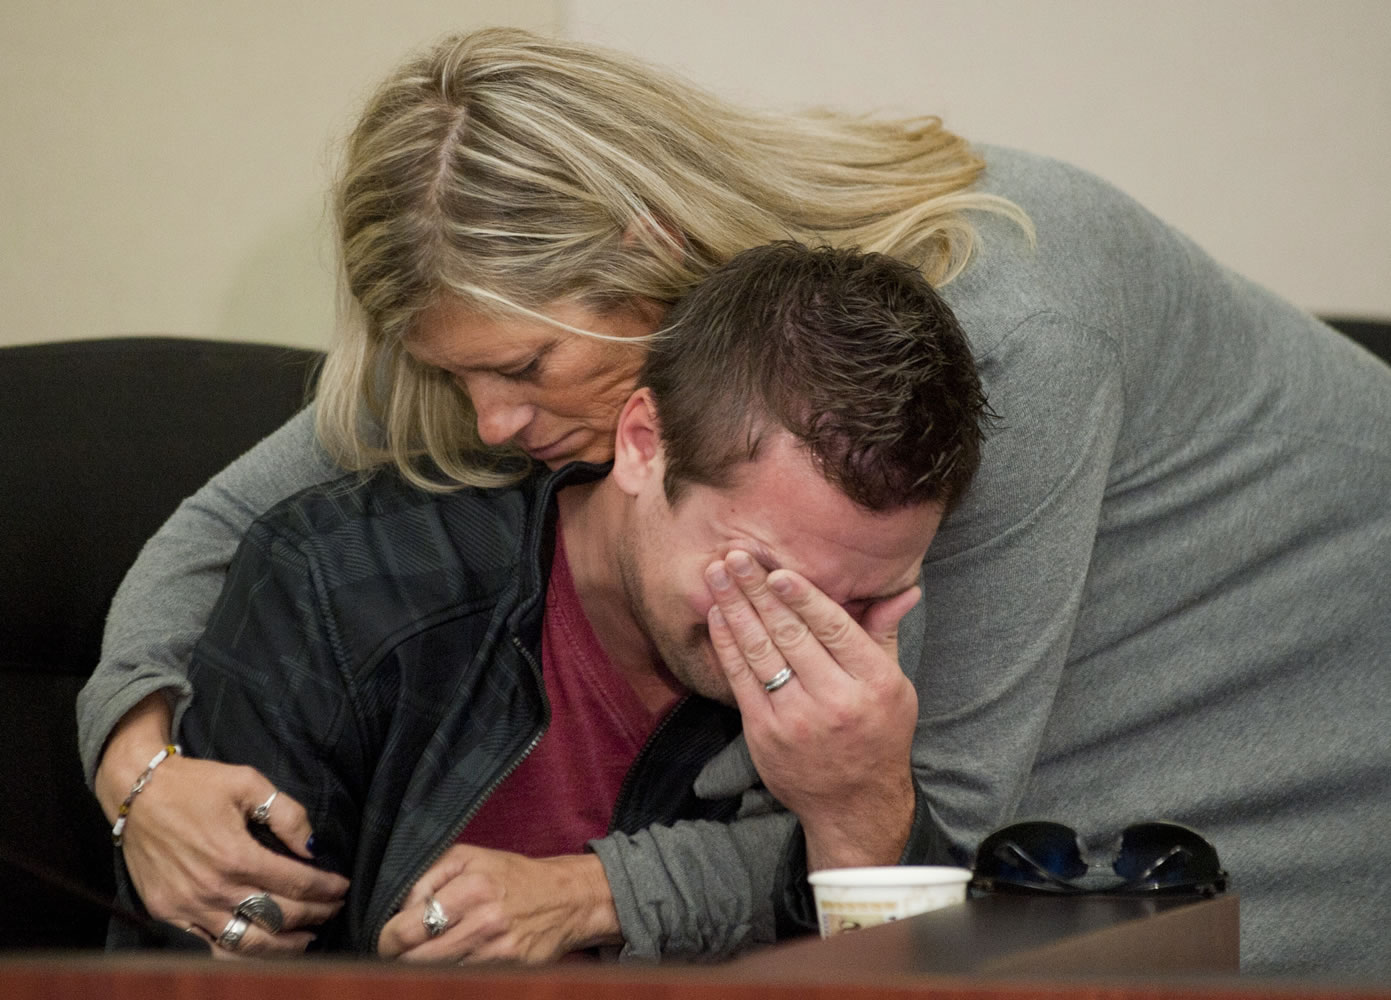 Lorilei Ritmiller, mother of Whitney Heichel, hugs her son-in-law Clint Heichel on Thursday as he begins to cry after attempting to speak at a news conference in the city of Gresham, Ore., council chambers.